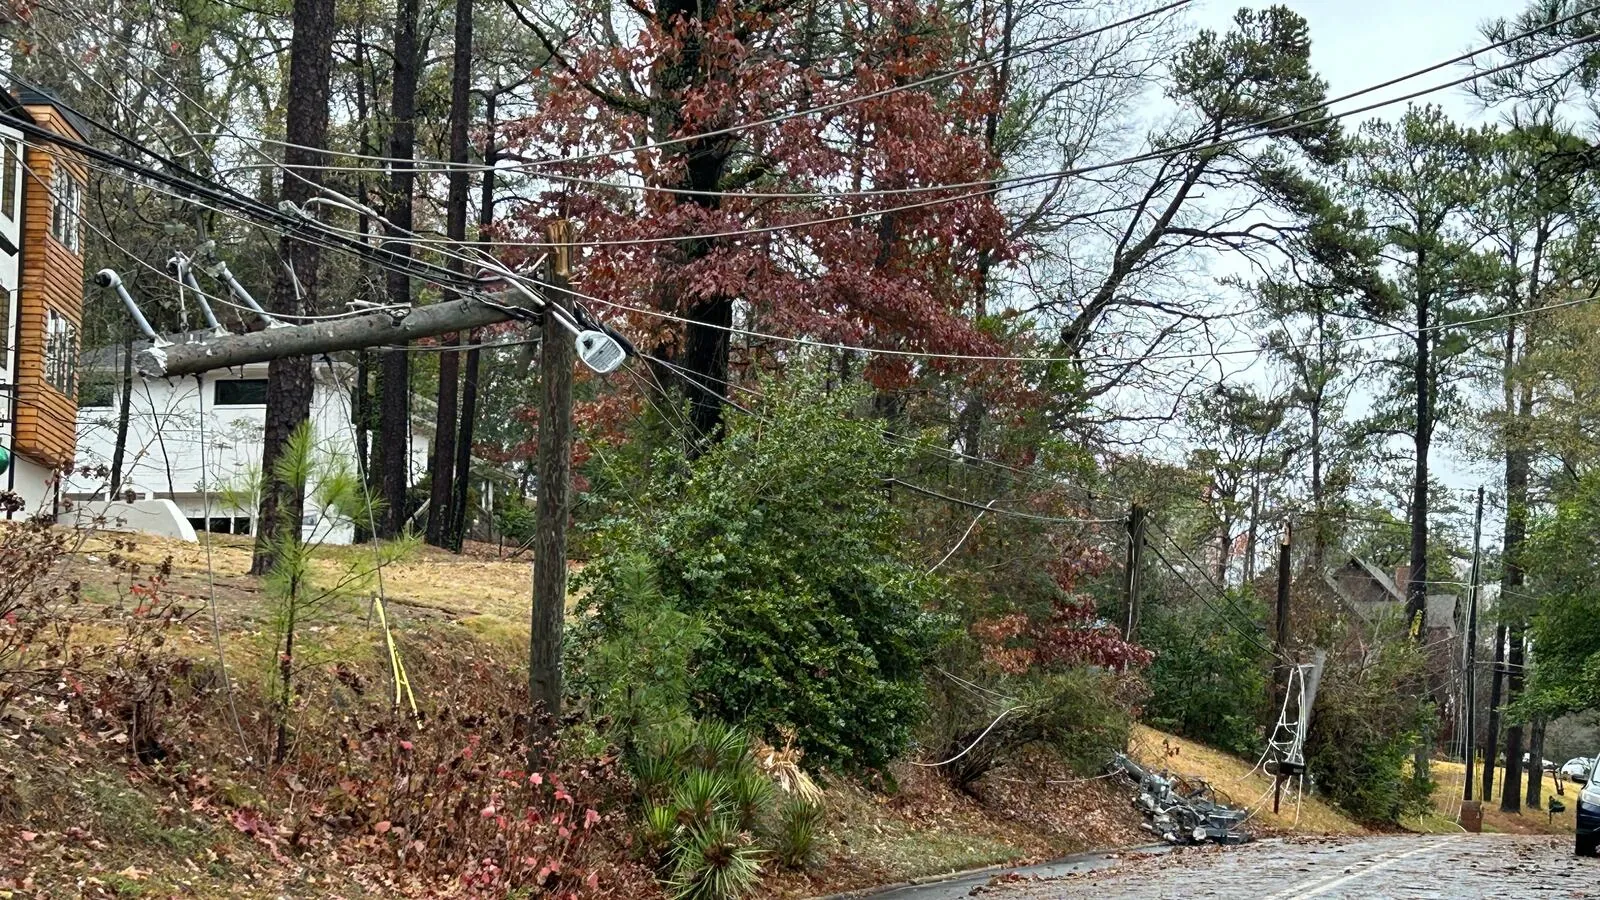 Strong storms knock down trees, power lines across central Alabama Sunday